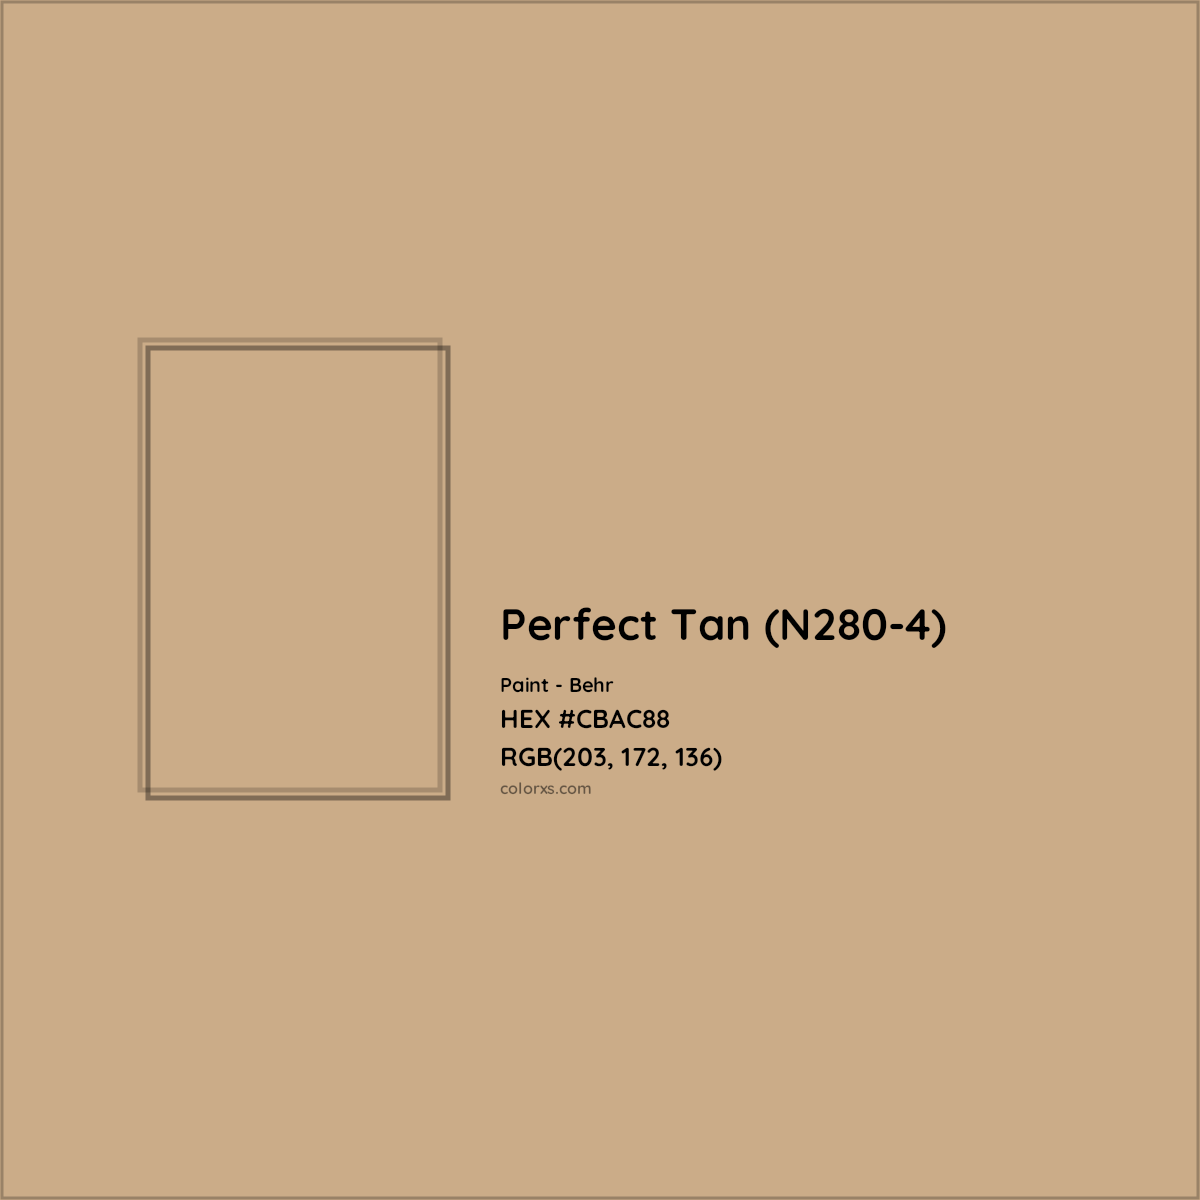 HEX #CBAC88 Perfect Tan (N280-4) Paint Behr - Color Code